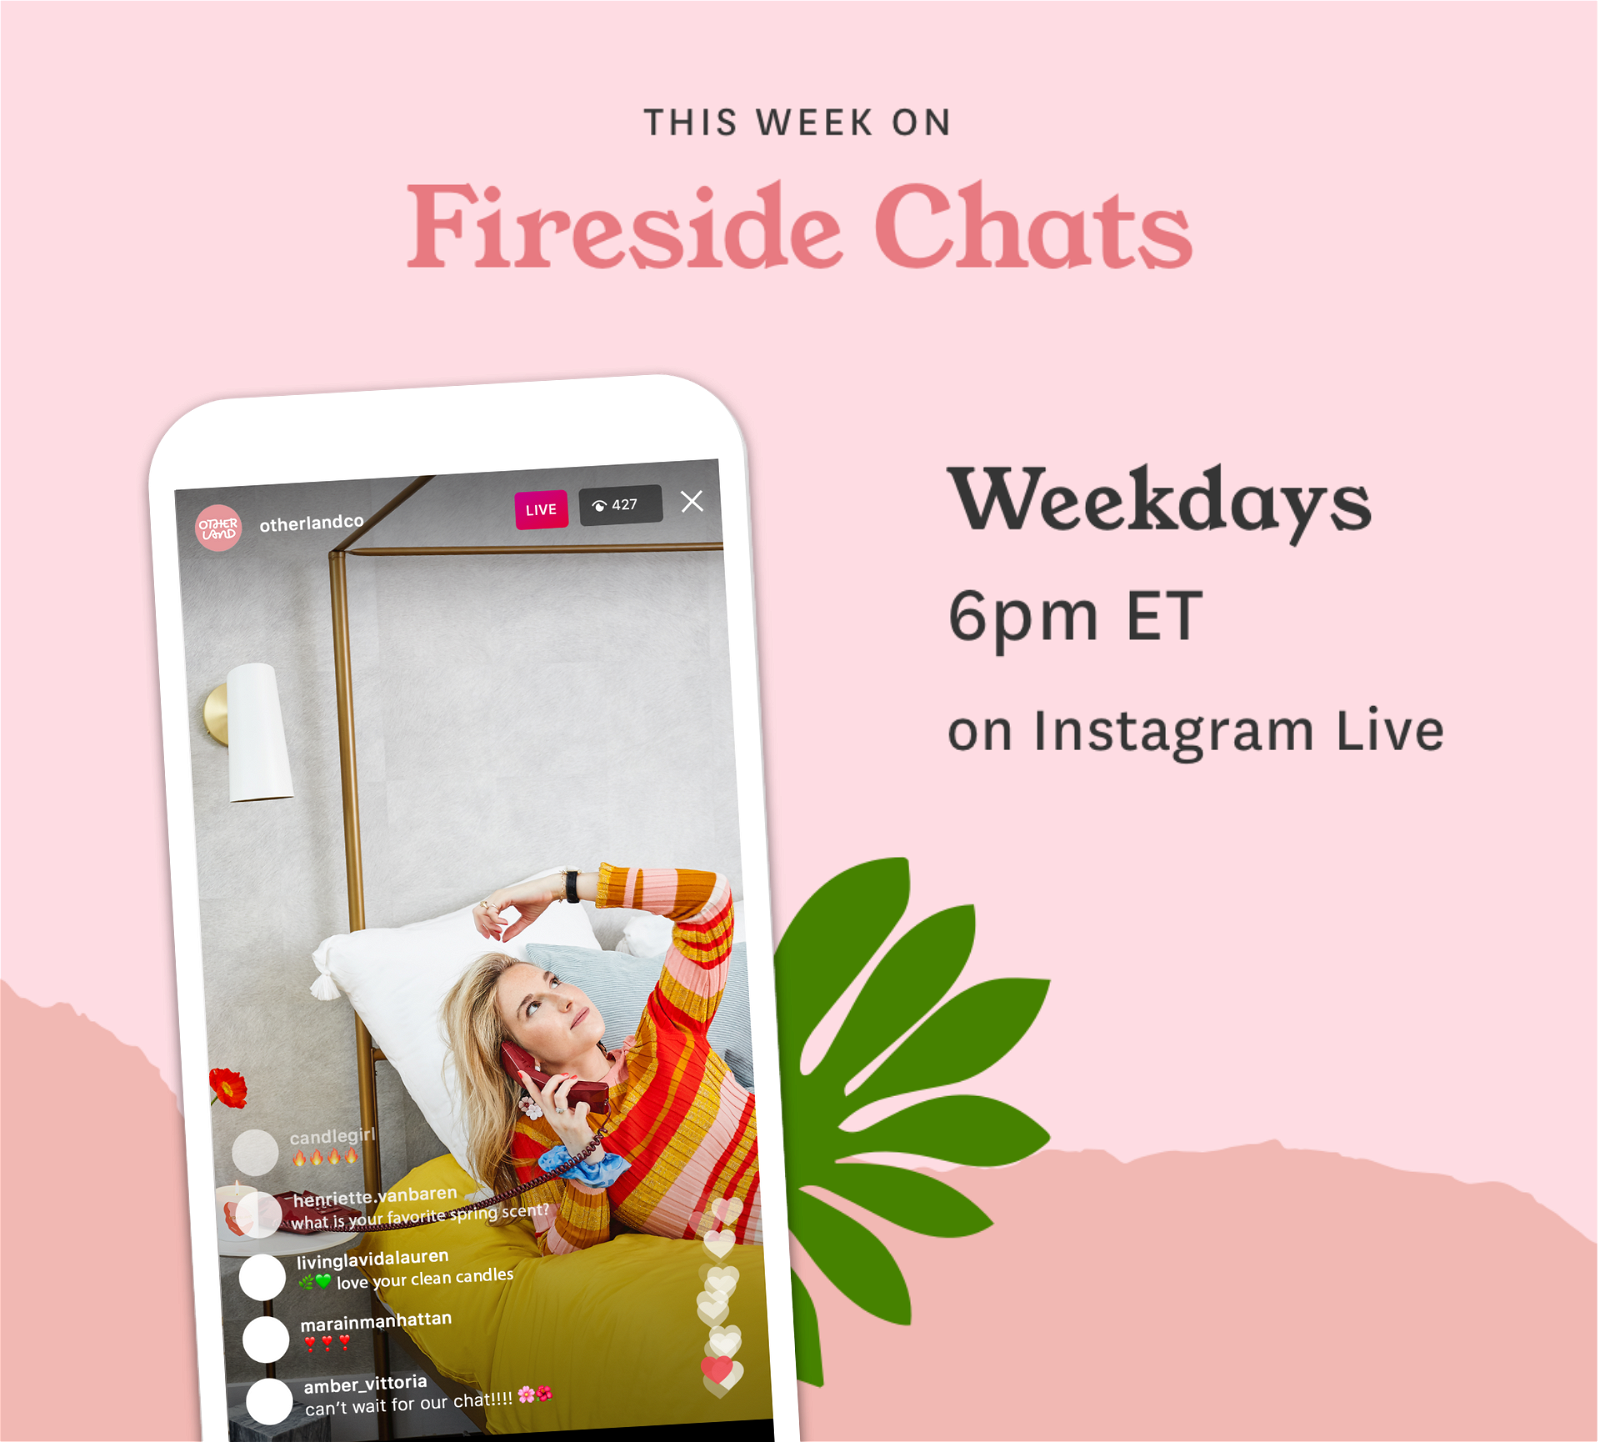 Join us for Fireside Chats on Instagram Live